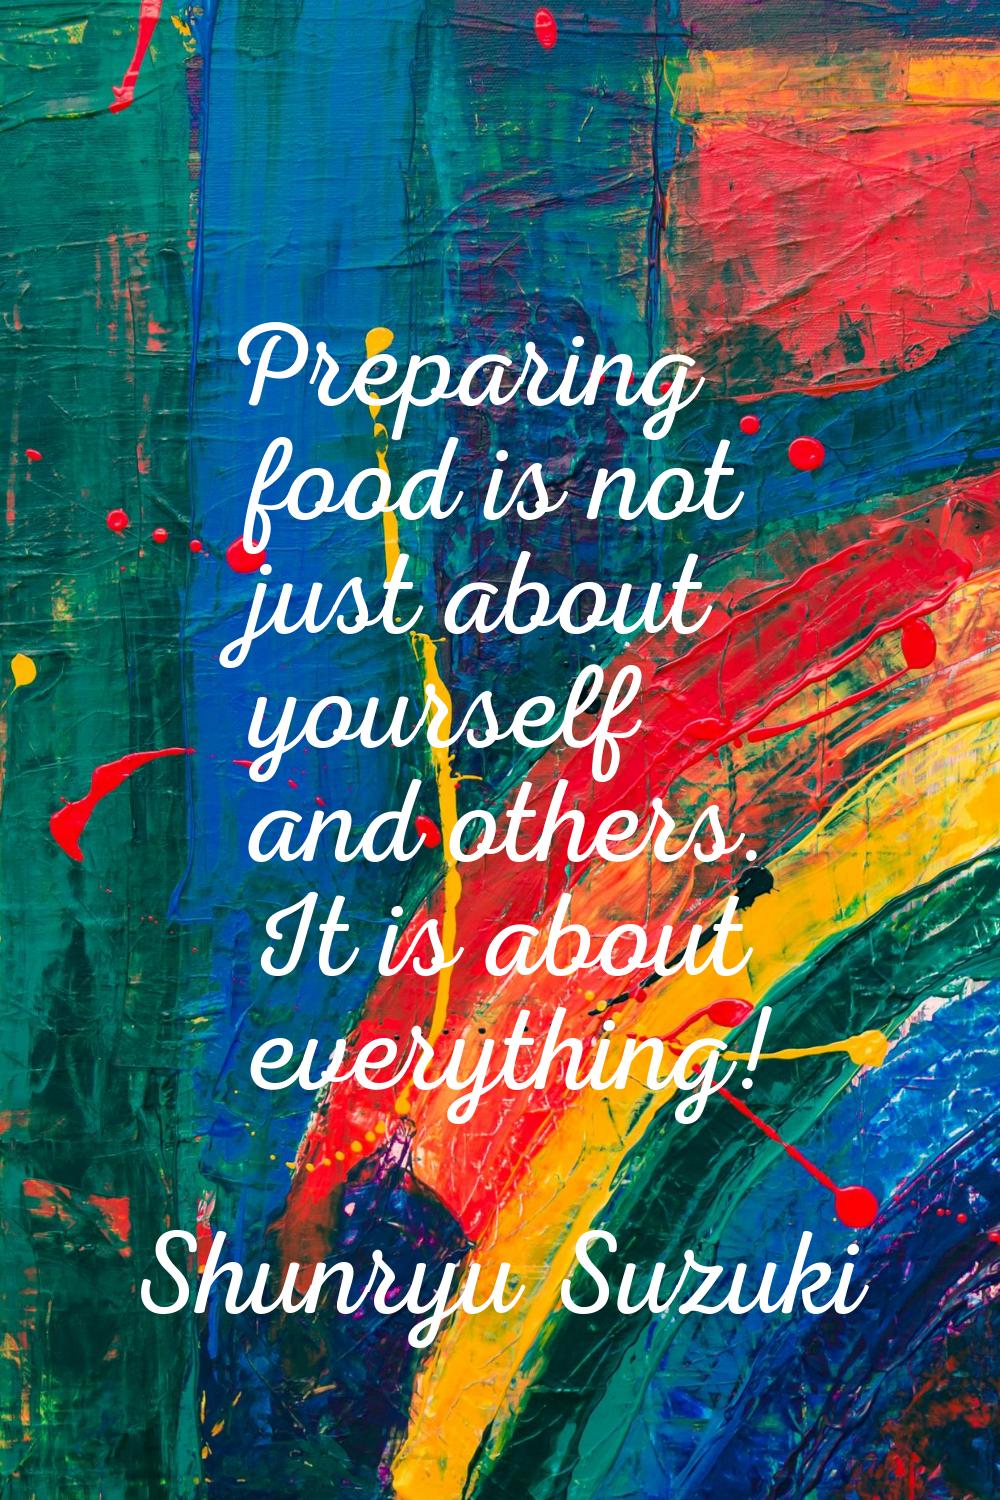 Preparing food is not just about yourself and others. It is about everything!